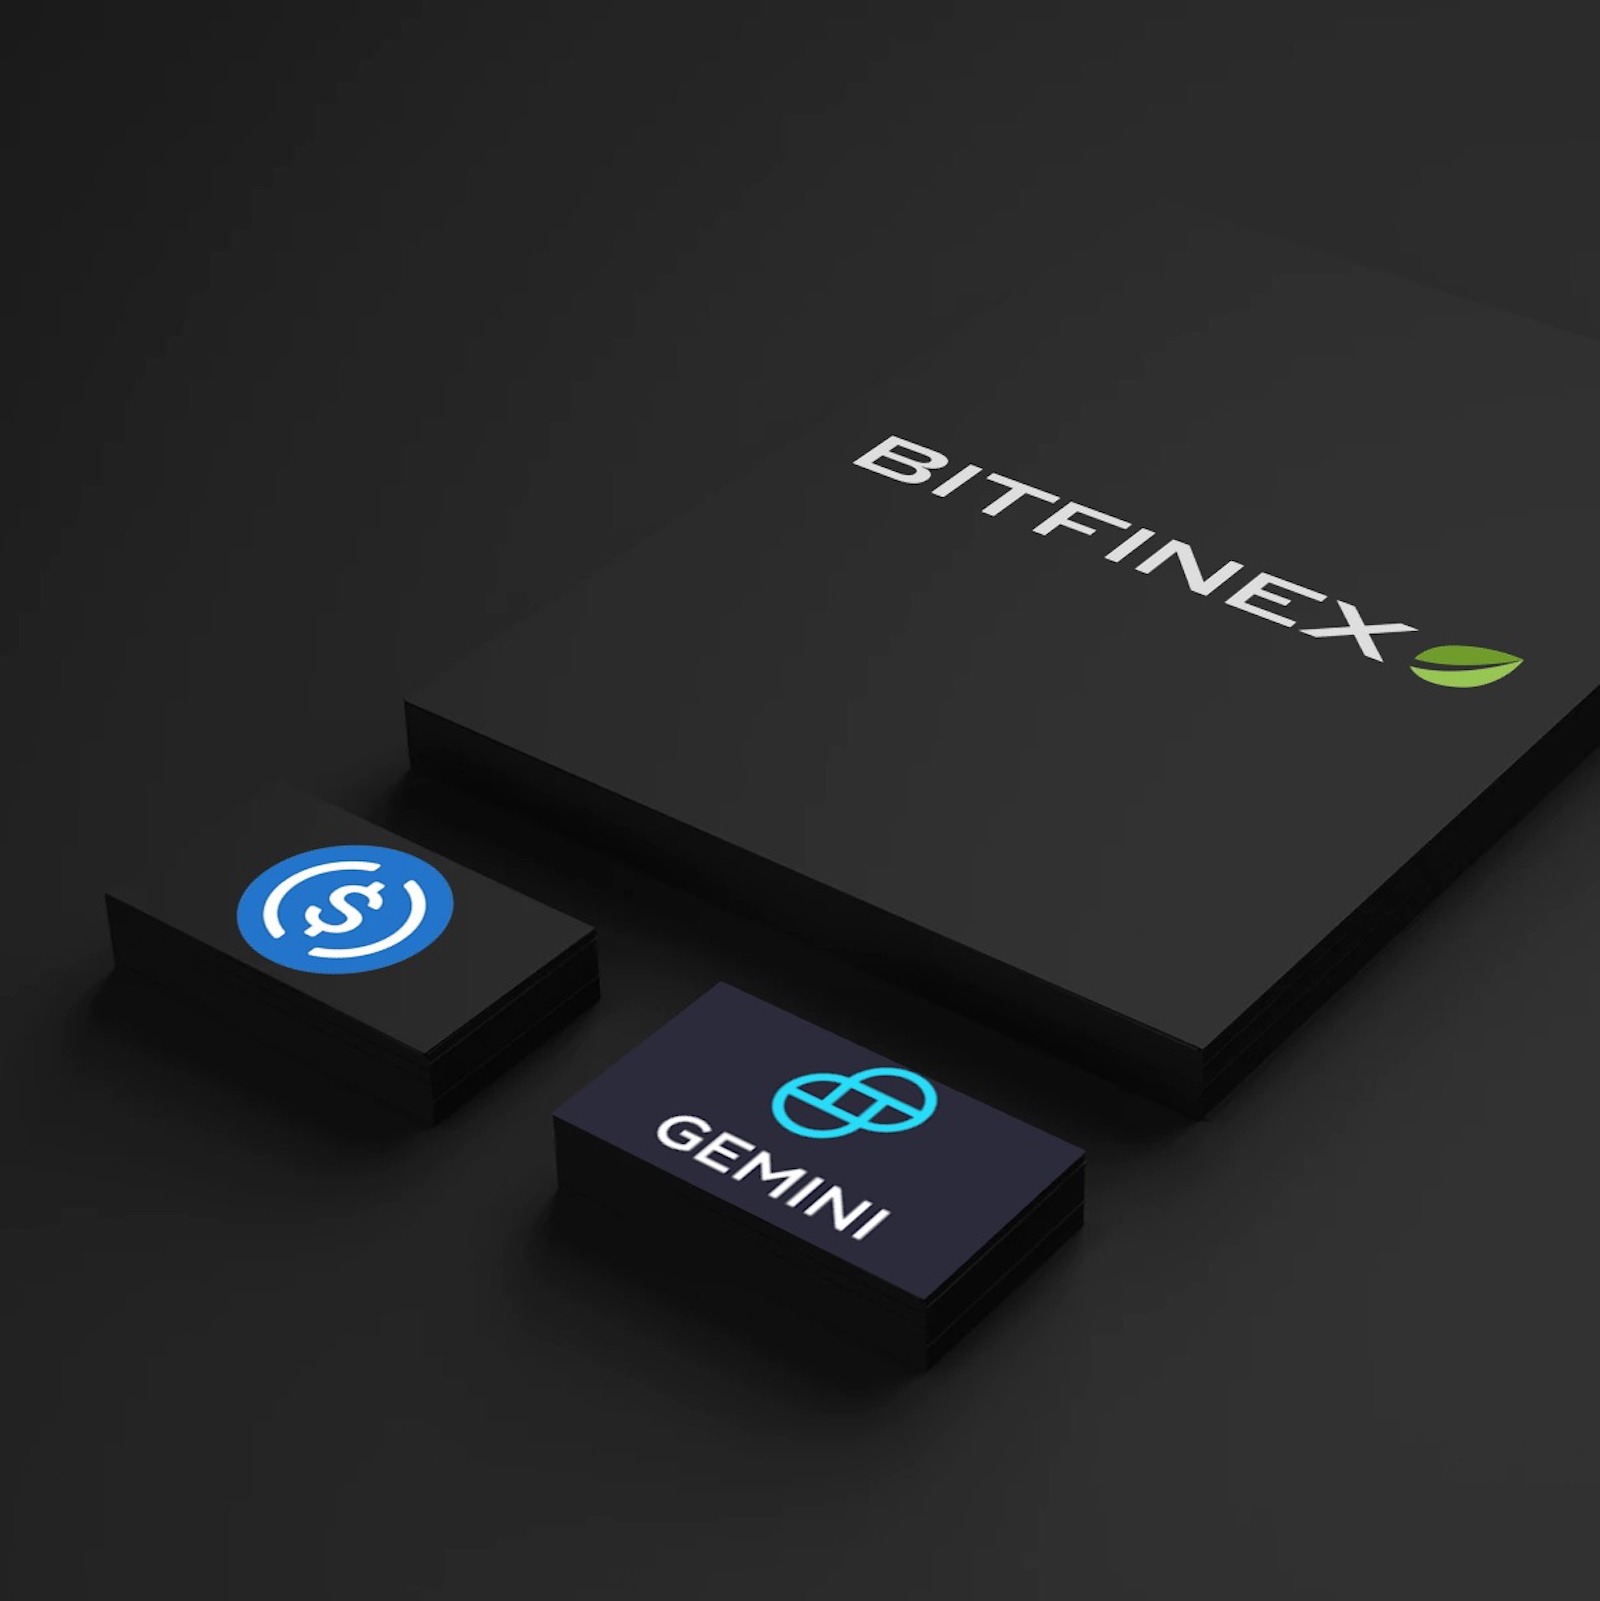 Bitfinex Adds Four Stablecoins Including GUSD and USDC